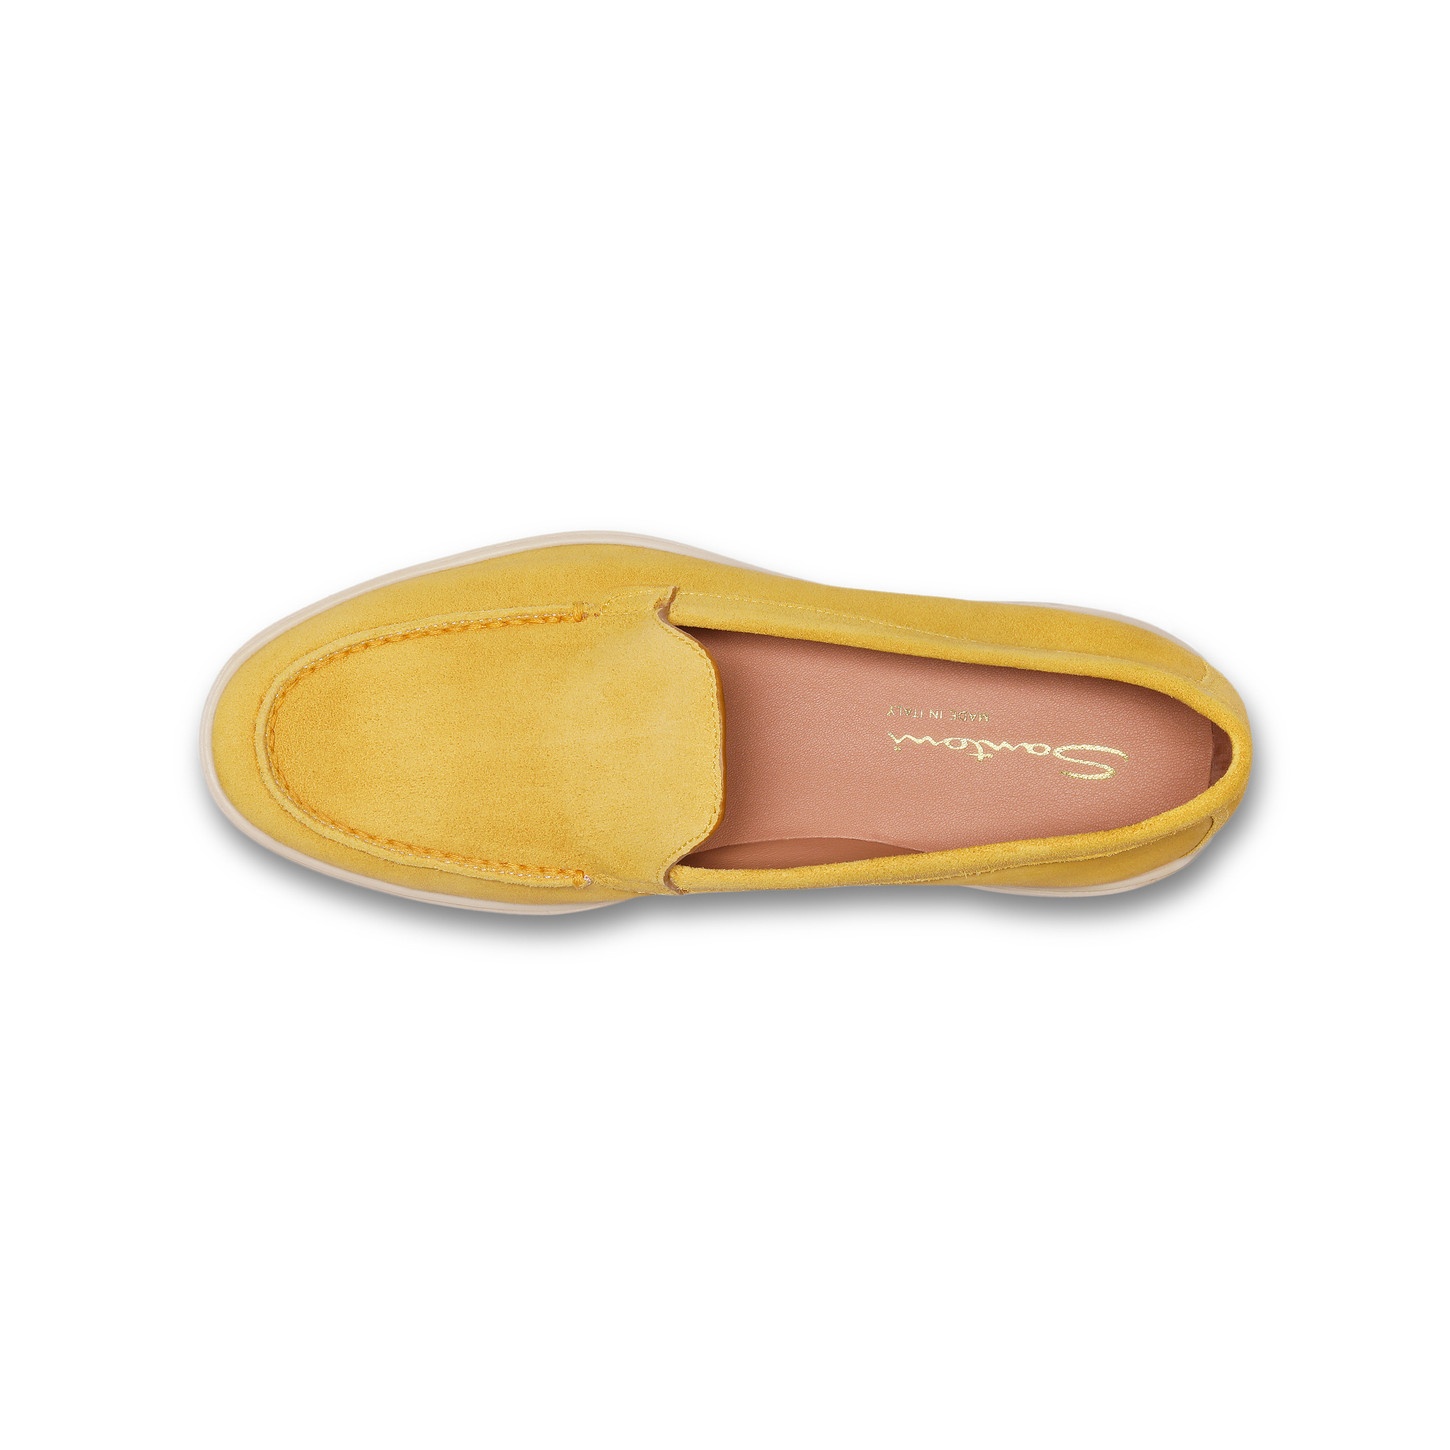 Women's yellow suede loafer - 5